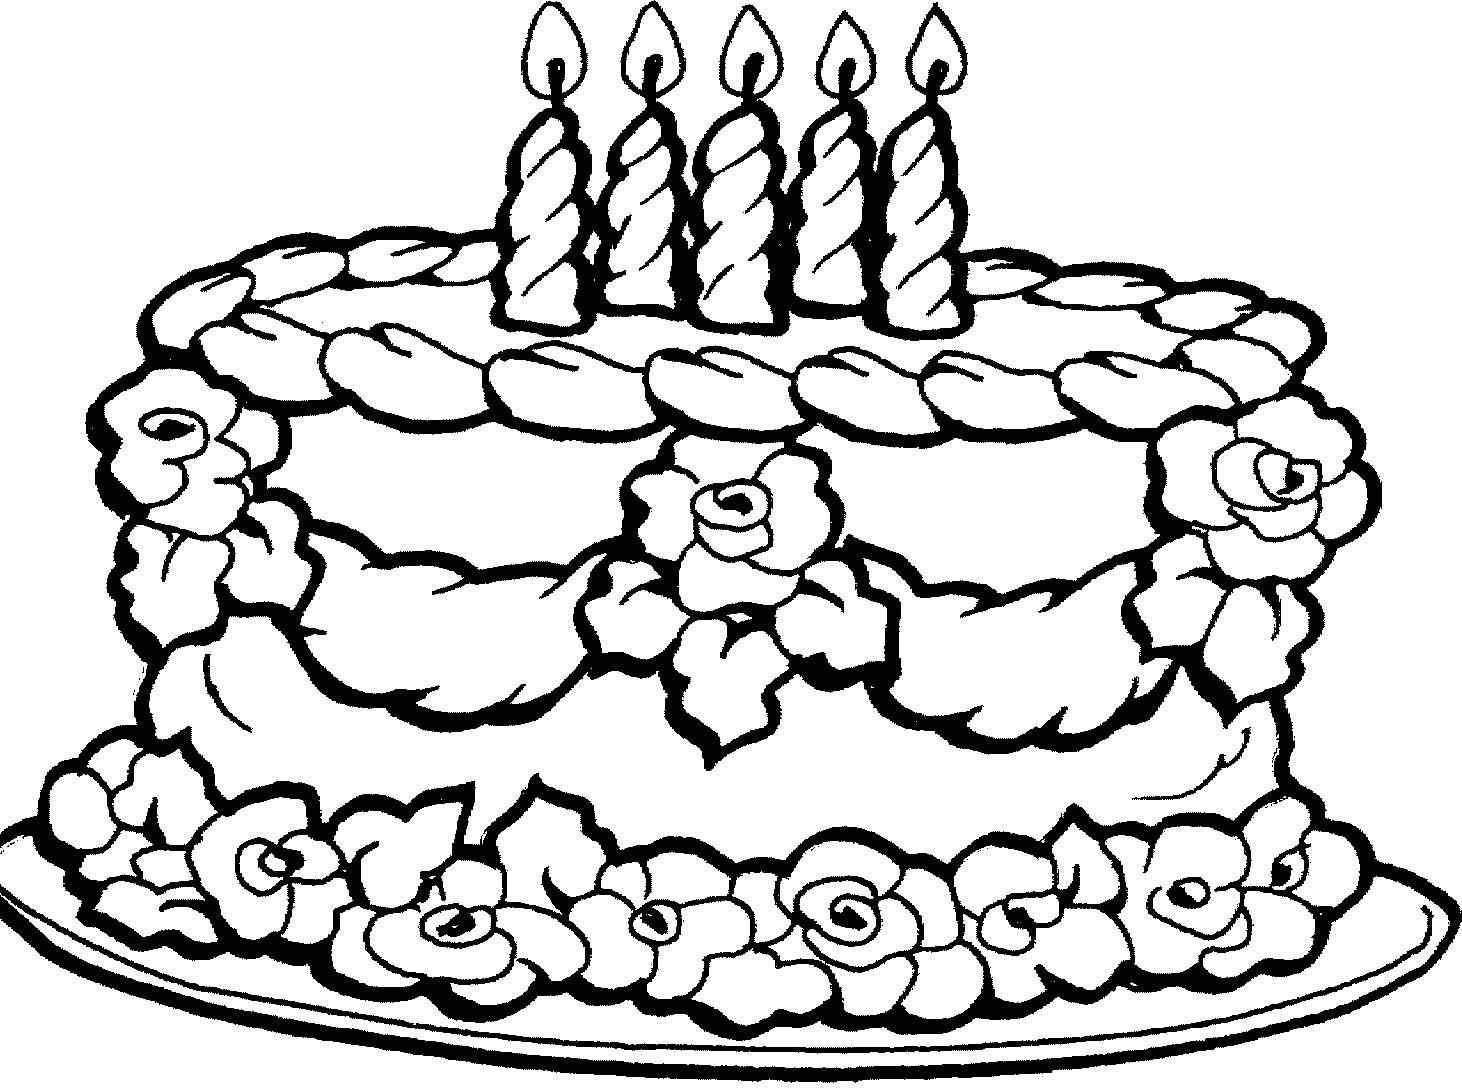 Birthday Cake- Line Drawing - ClipArt Best